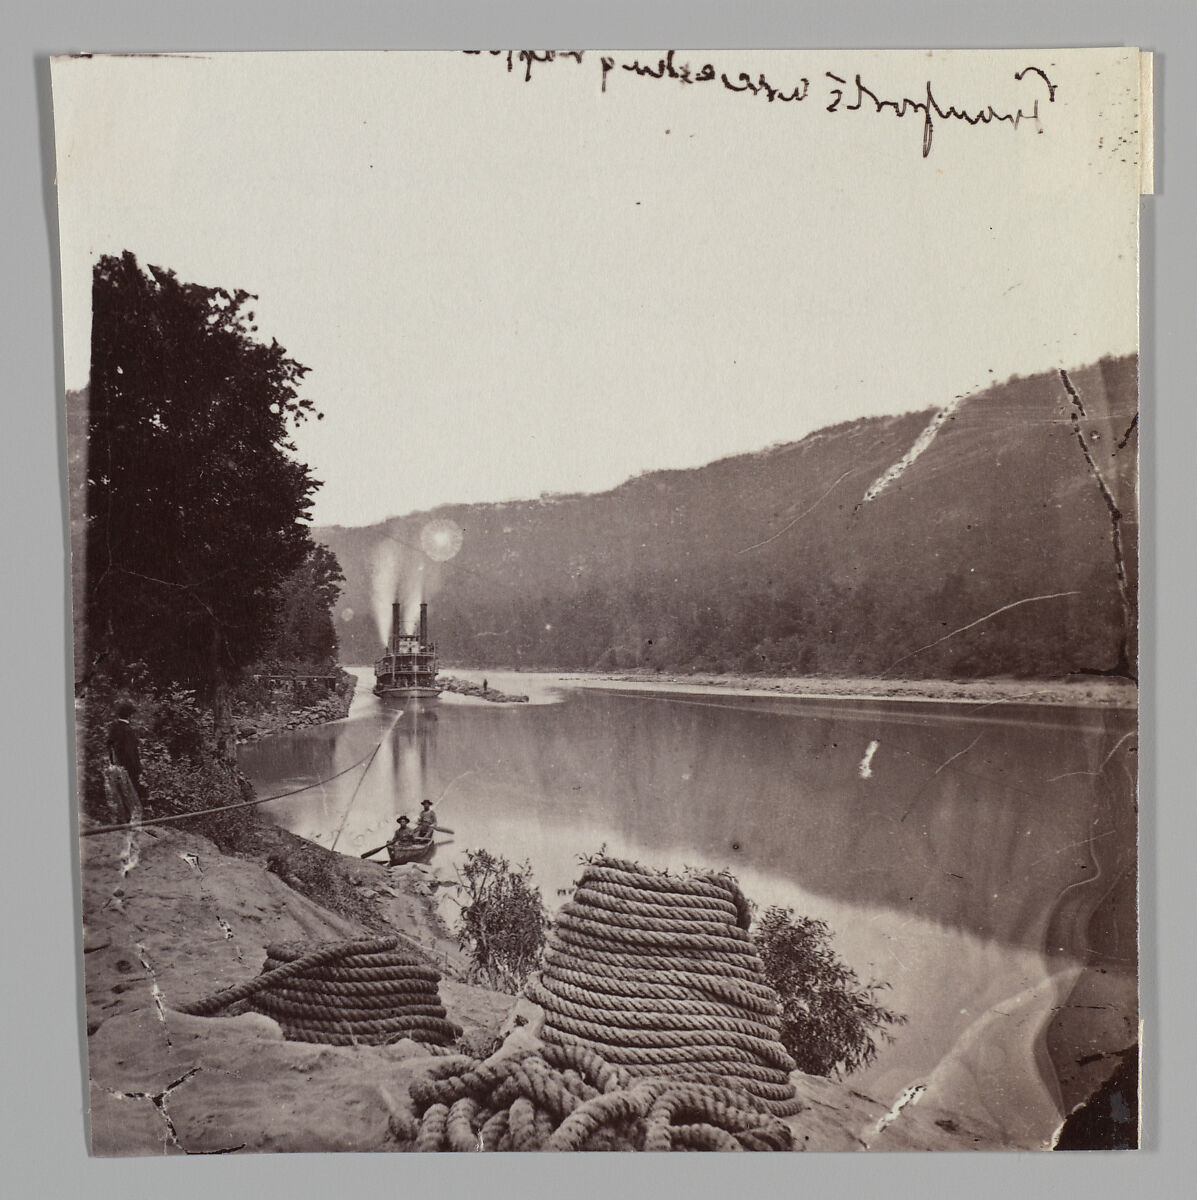 U.S. Transport in Rapids, Tennessee River/The Suck - Tennessee River below Chattanooga, looking down stream, George N. Barnard (American, 1819–1902), Albumen silver print from glass negative 